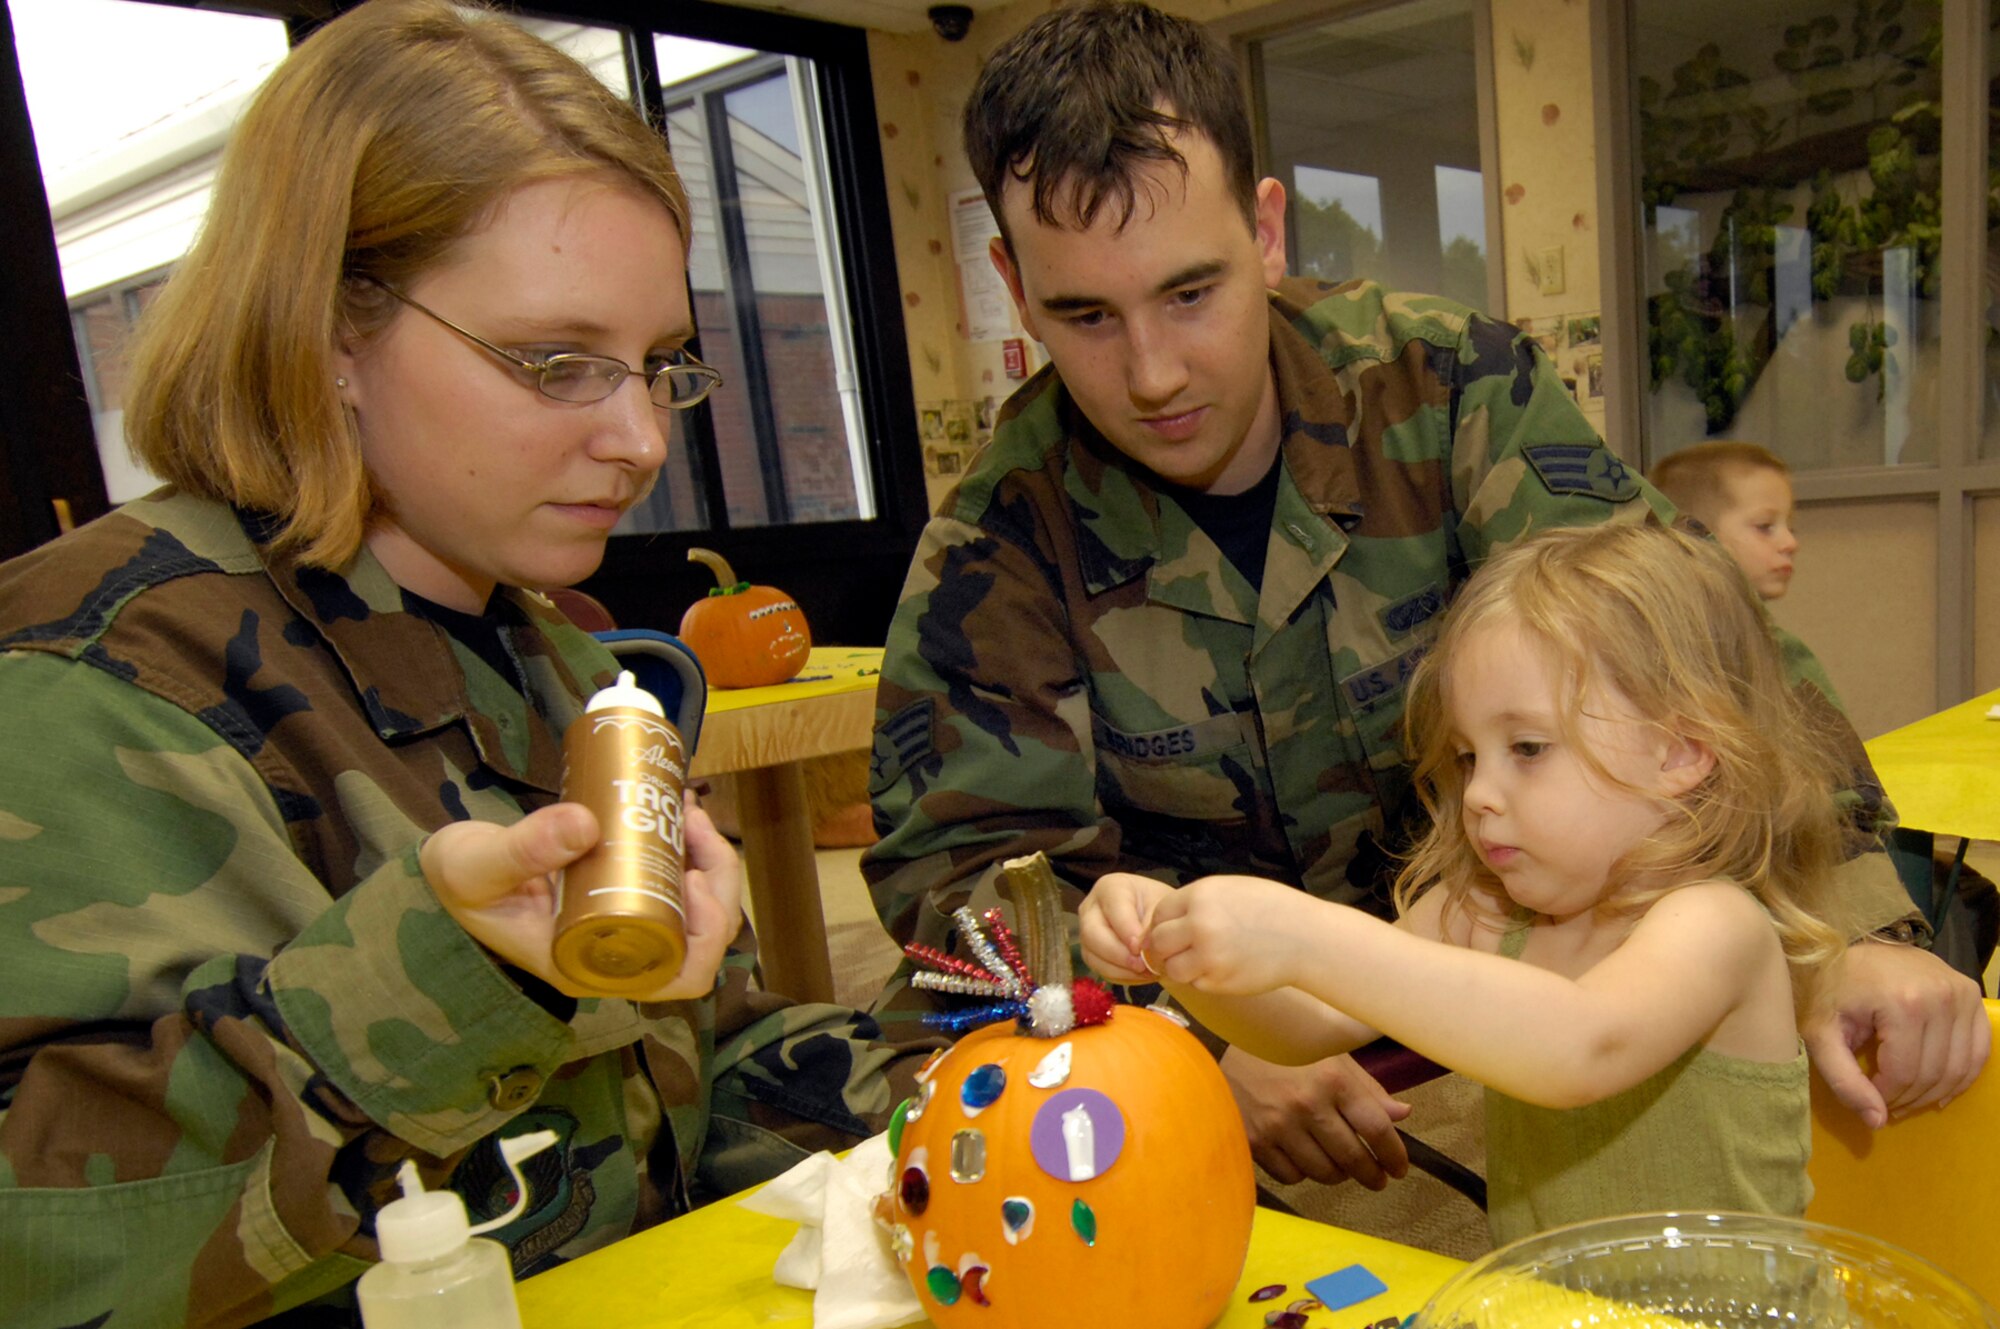 HANSCOM AFB, Mass. – Senior Airman Jacqueline Bridges (left) and Senior Airman Jeremy Bridges help their daughter Alyssa decorate a pumpkin during the Child Development  Center’s pumpkin decorating activity for families enrolled at the center. The CDC offers many opportunities throughout the year for families to take part in activities such as this. The next activity will take place on Nov. 1 from 3 to 5 p.m. Volunteers are asked to take part in a playground cleanup at the CDC. (U.S. Air Force photo by Mark Wyatt)

